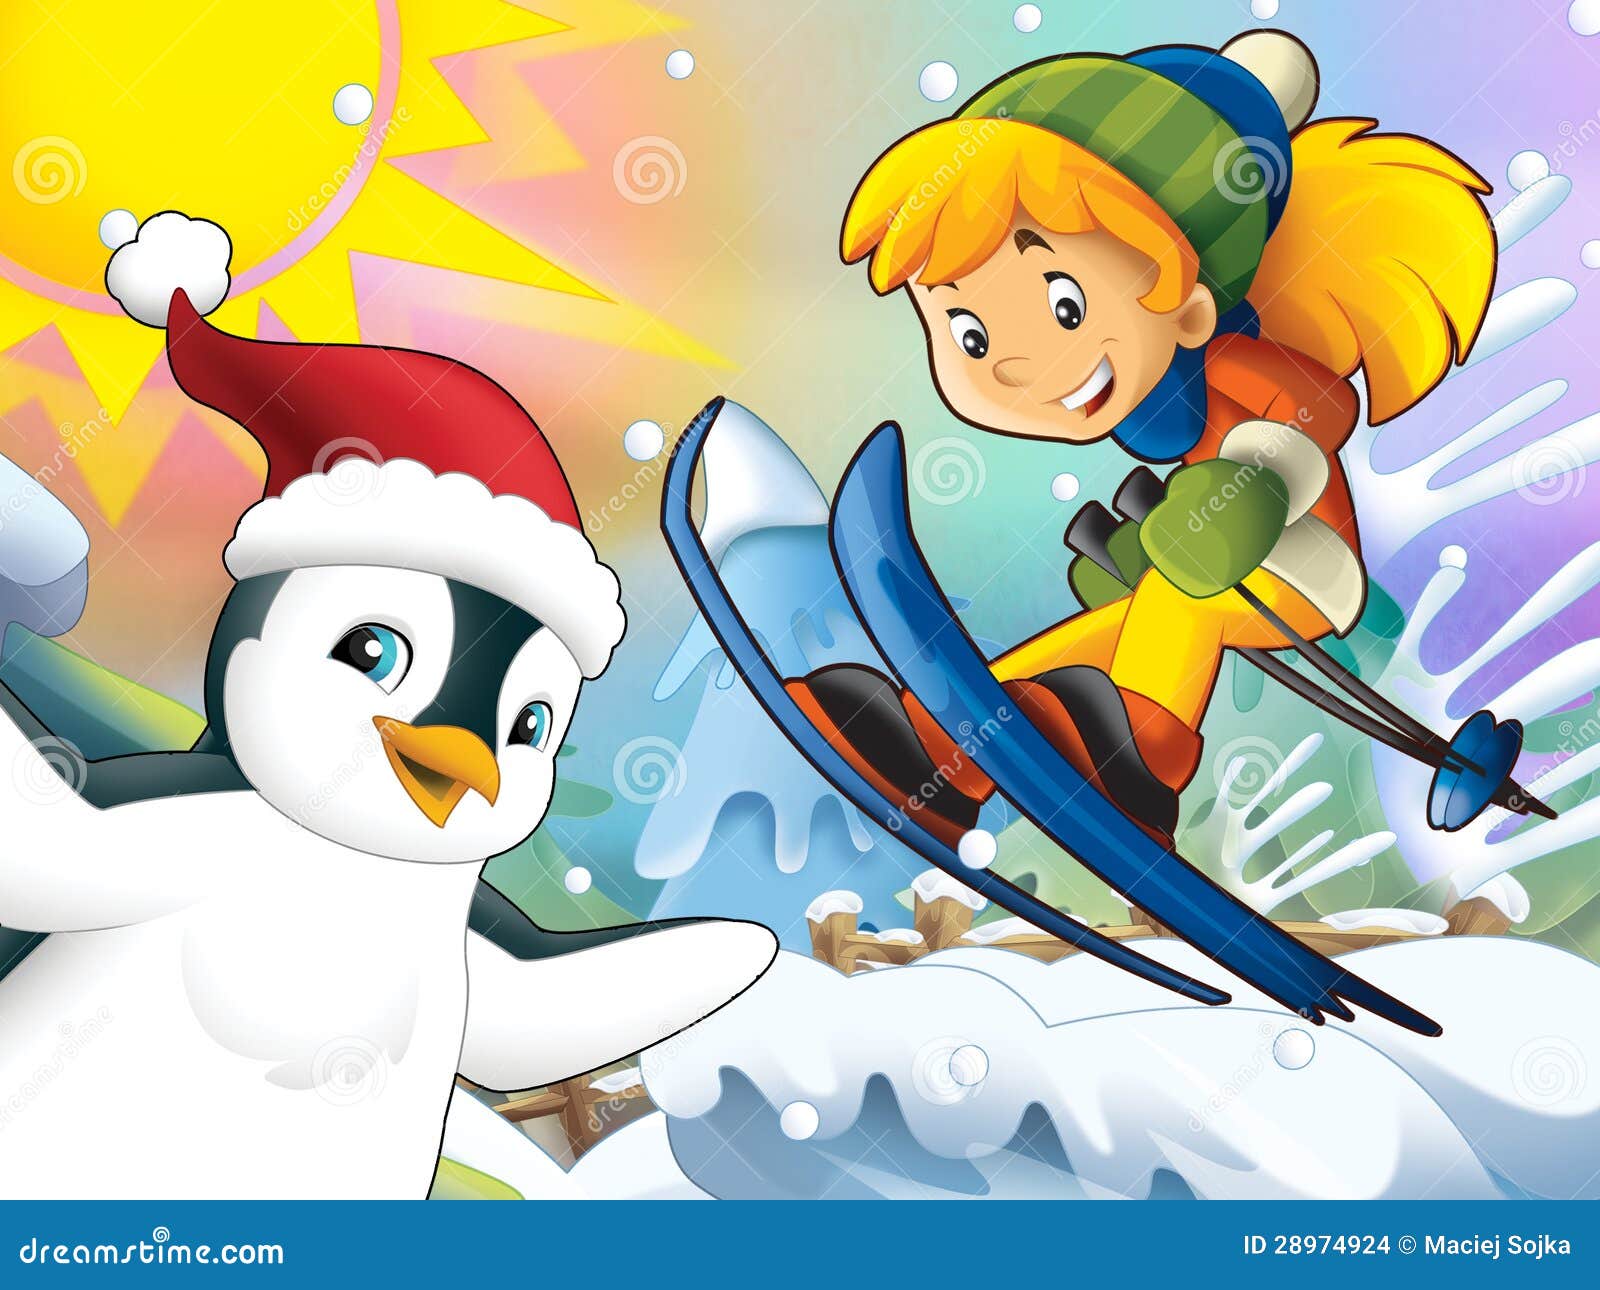 The cartoon child downhill jump with christmas characters